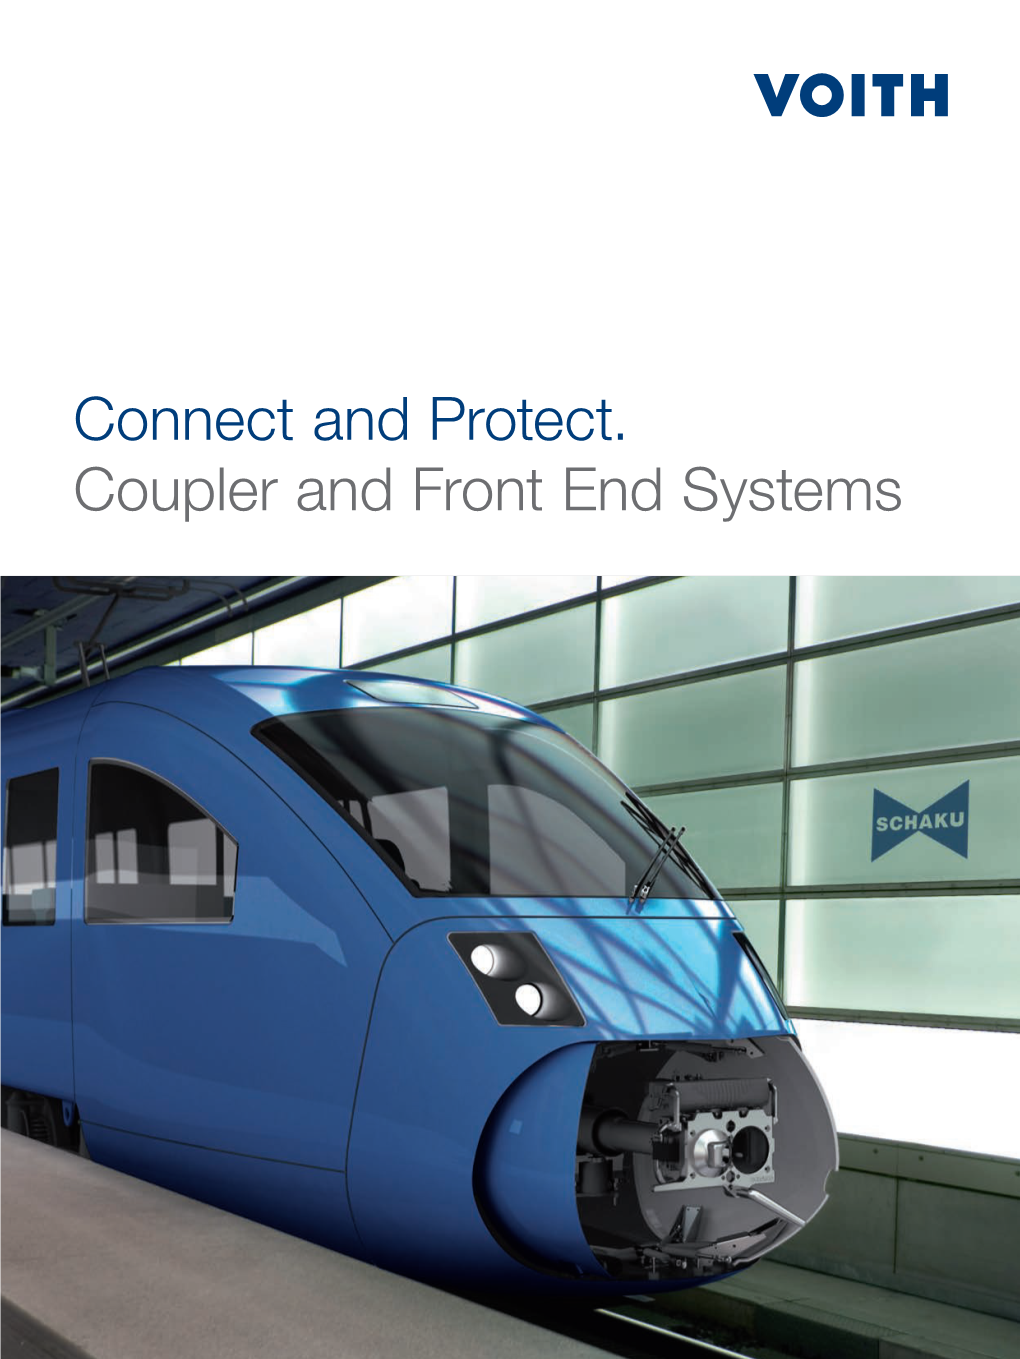 Connect and Protect. Coupler and Front End Systems